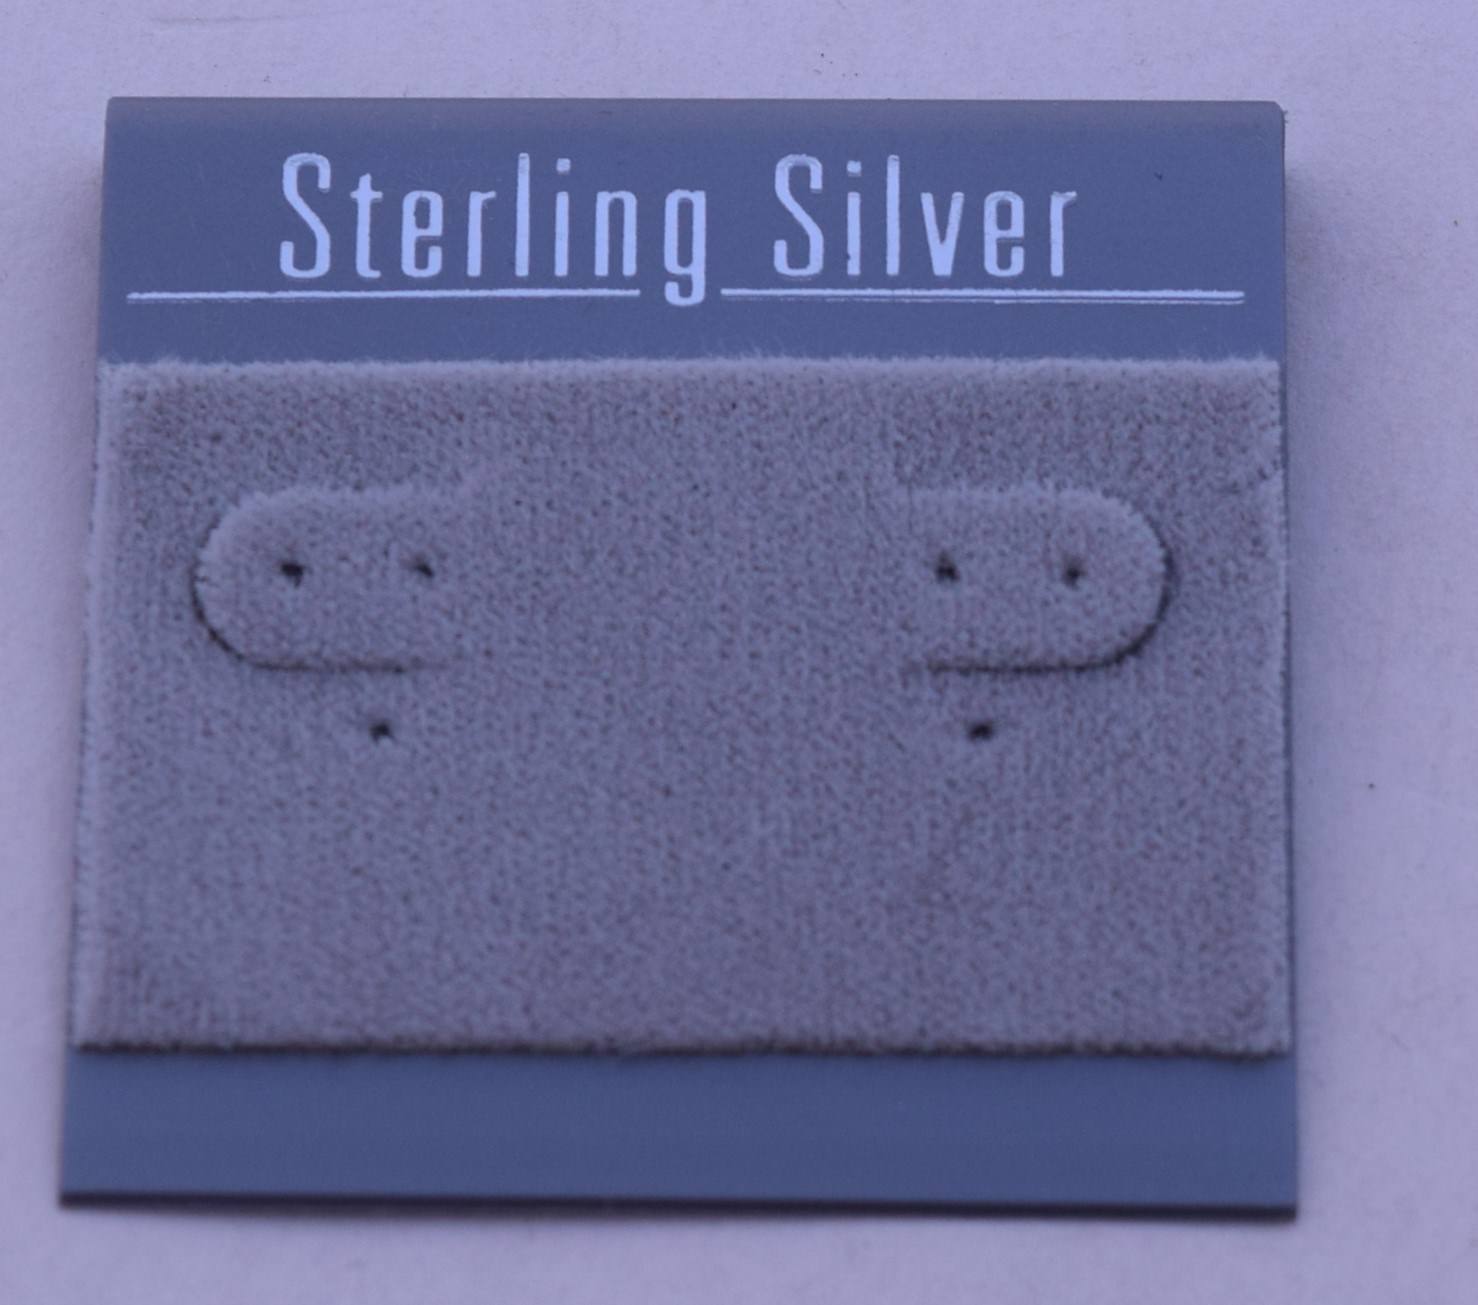 100ct Lot Sterling Silver Grey Felt Plastic Holder Hanging Earrings Display Card Unbranded/Generic Does Not Apply